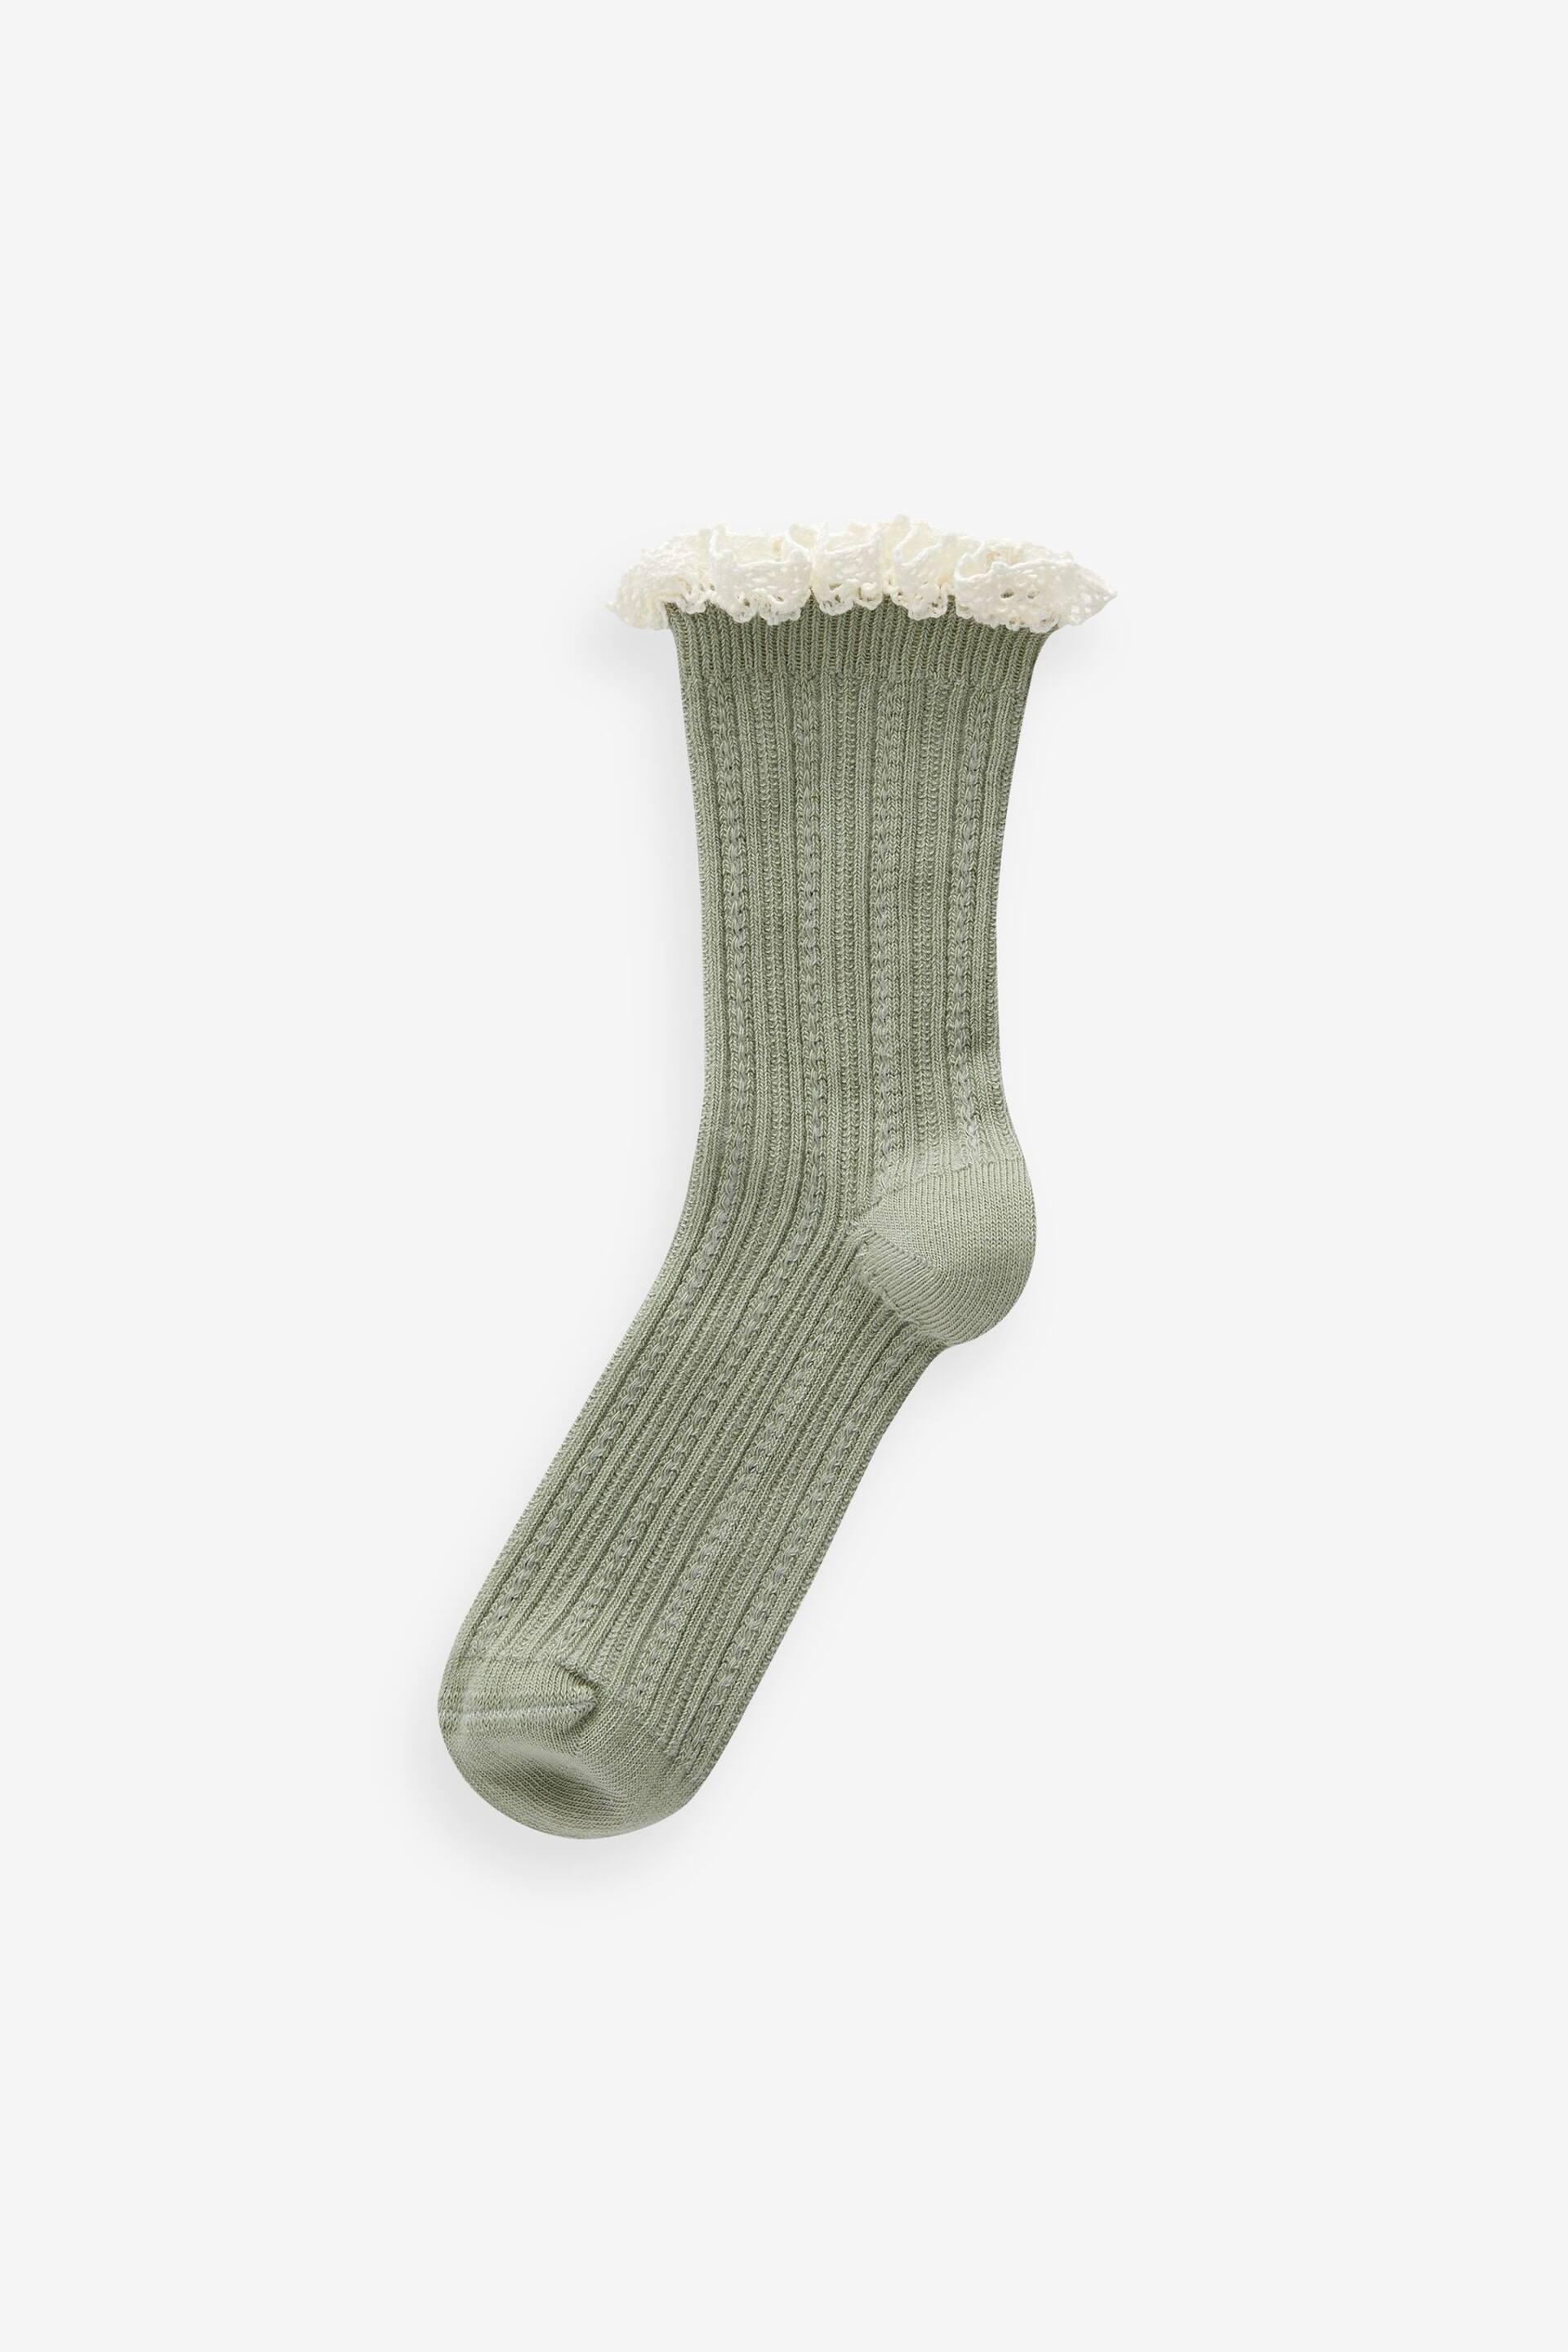 Cream and Green Cotton Rich Ruffle Frill Ankle Socks 2 Pack - Image 2 of 3